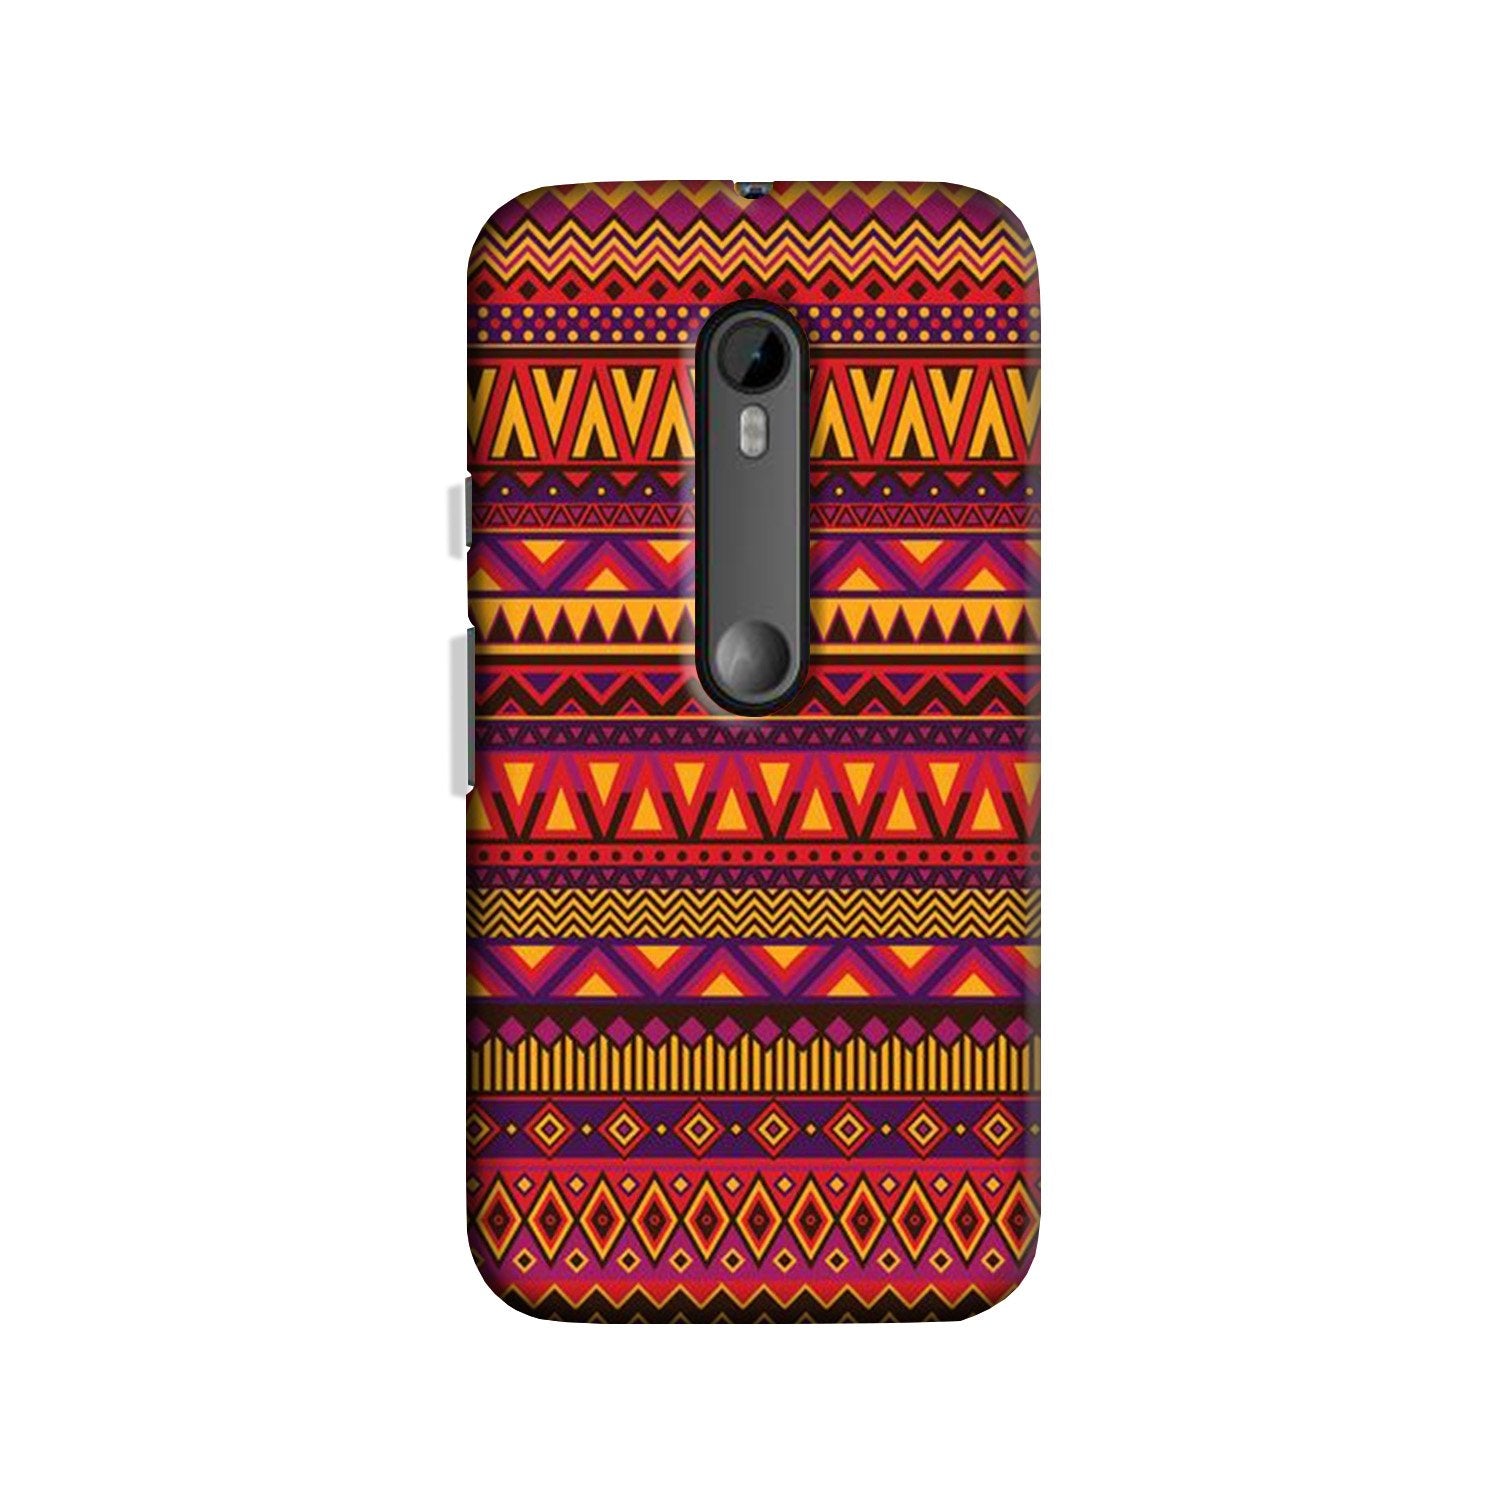 Zigzag line pattern2 Case for Moto X Force